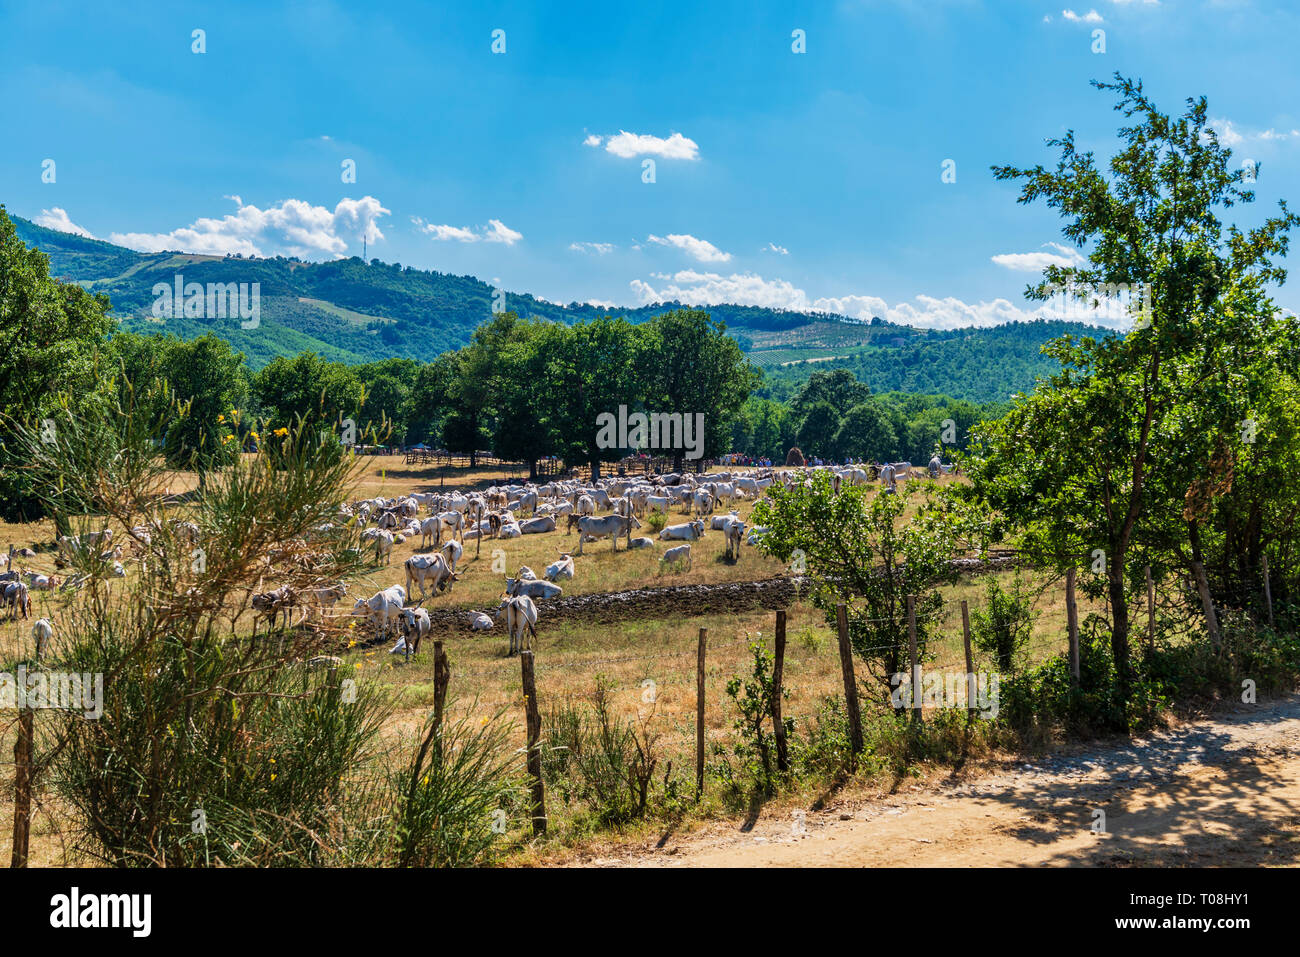 scenes from an outside party during the transhumance Stock Photo